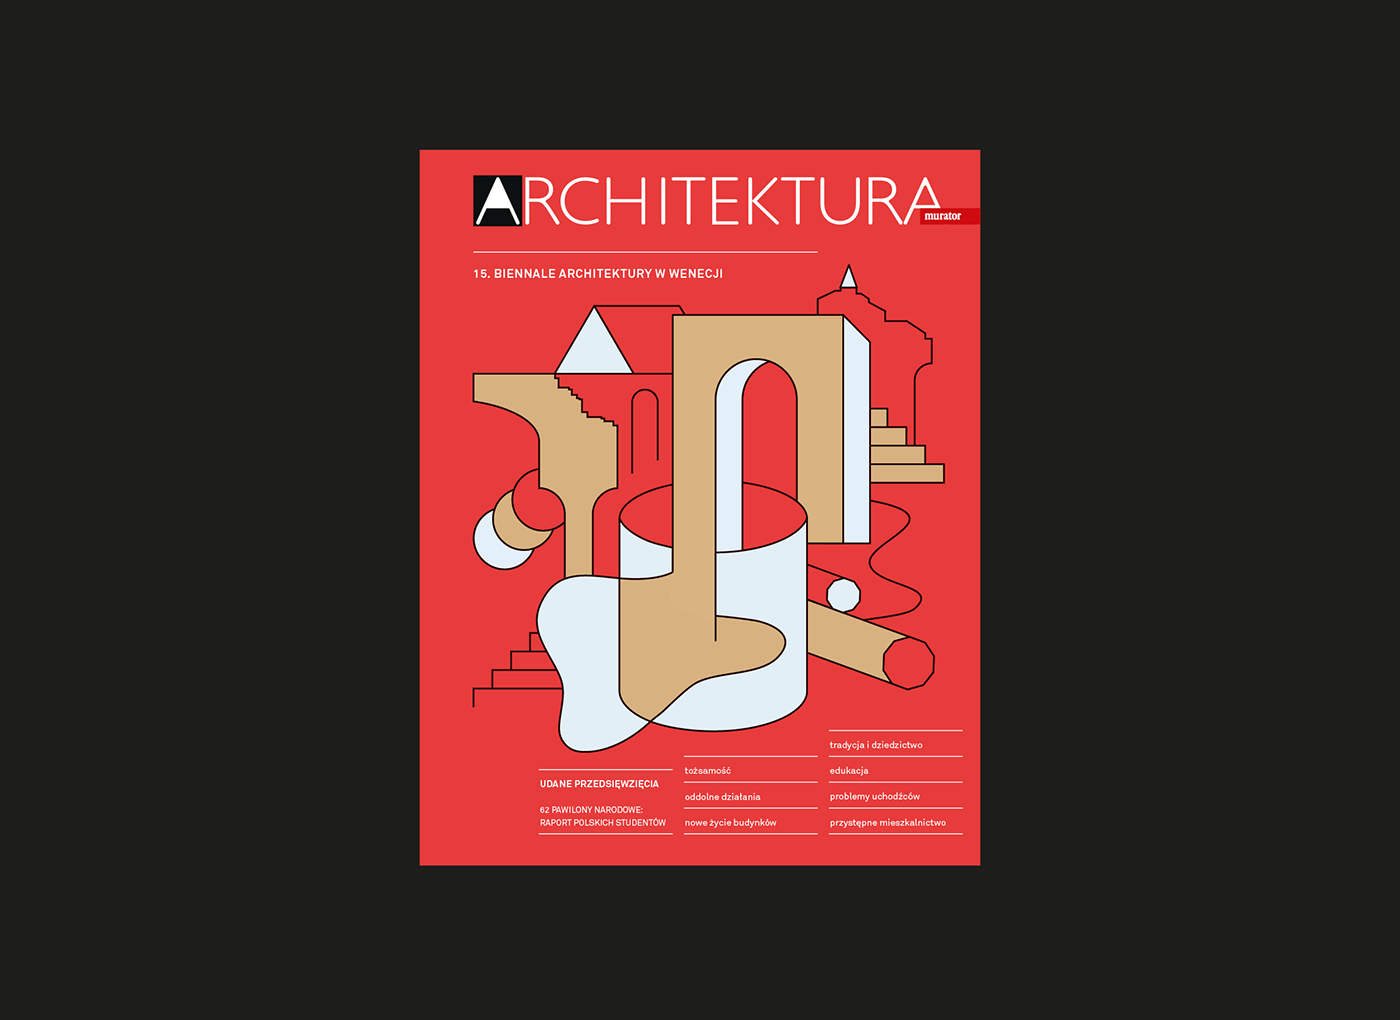 poster posters plakaty typo typography   Chopin music Events architecture graphic